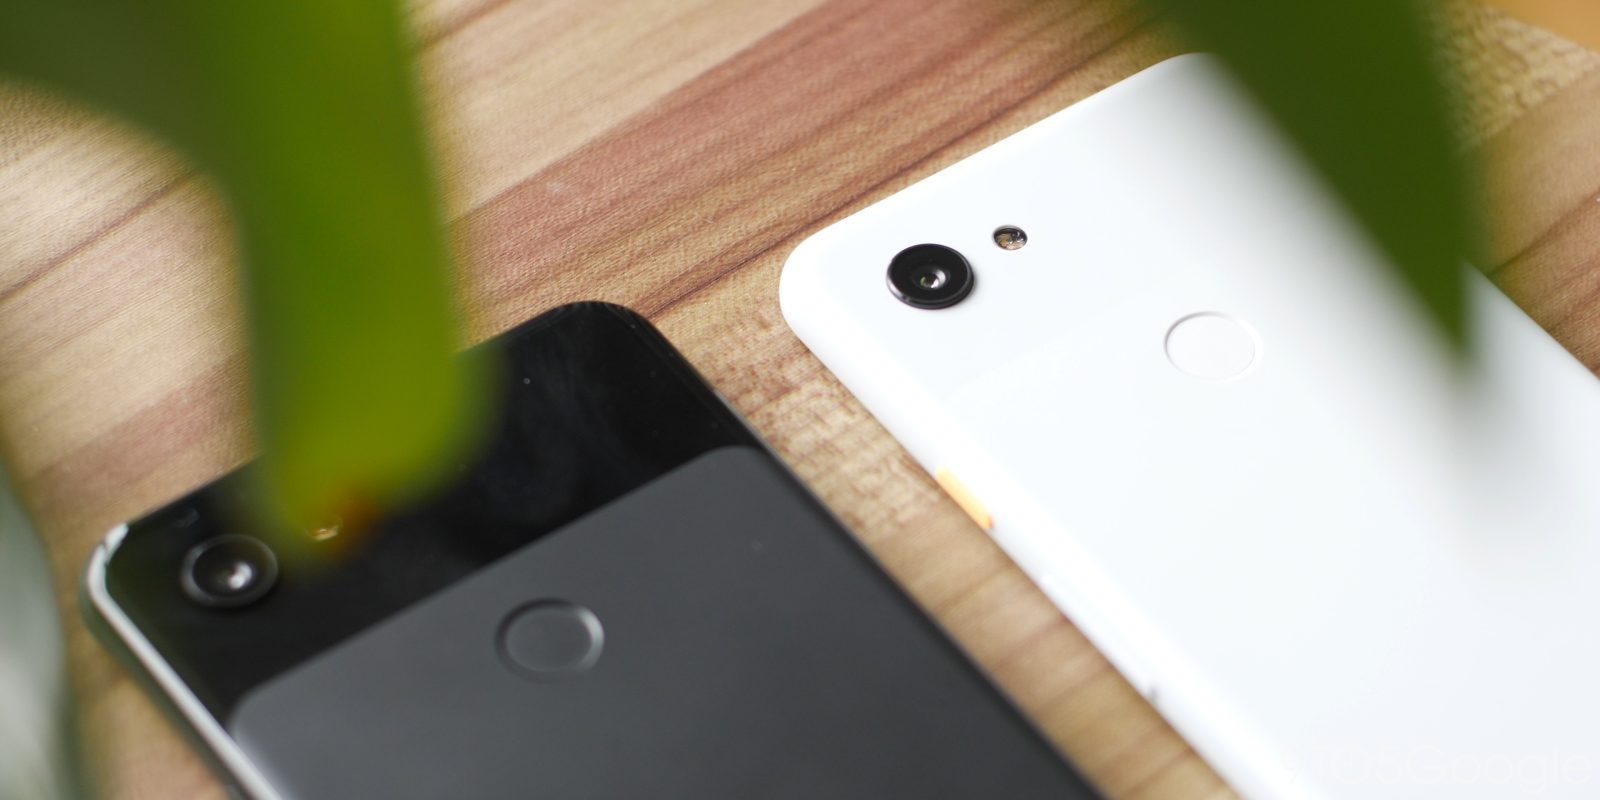 Google Pixel 3a won’t be eligible for Android Q Beta Program until June - 9to5Google thumbnail